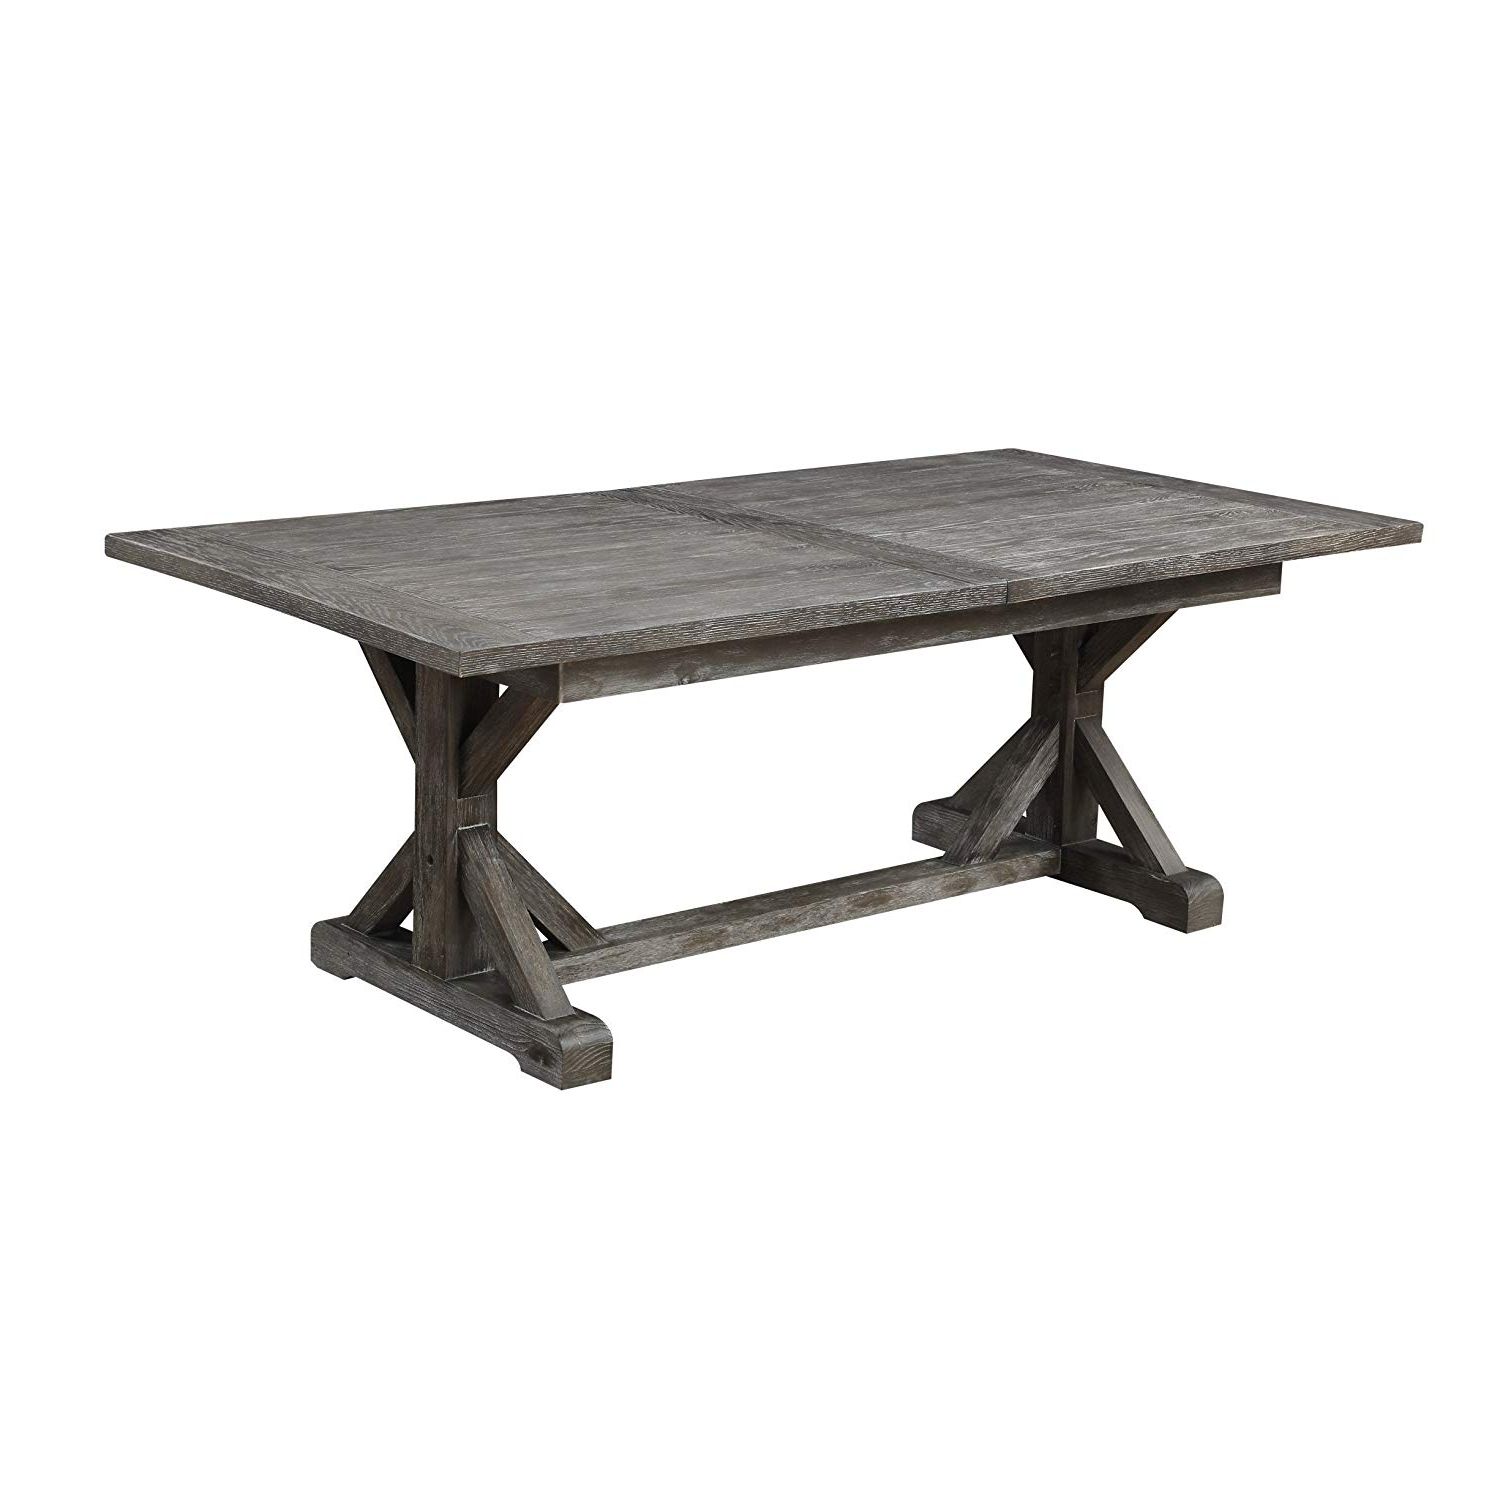 Well Known Valencia 72 Inch Extension Trestle Dining Tables Pertaining To Amazon: Emerald Home Paladin Rustic Charcoal Gray Dining Table (View 9 of 25)